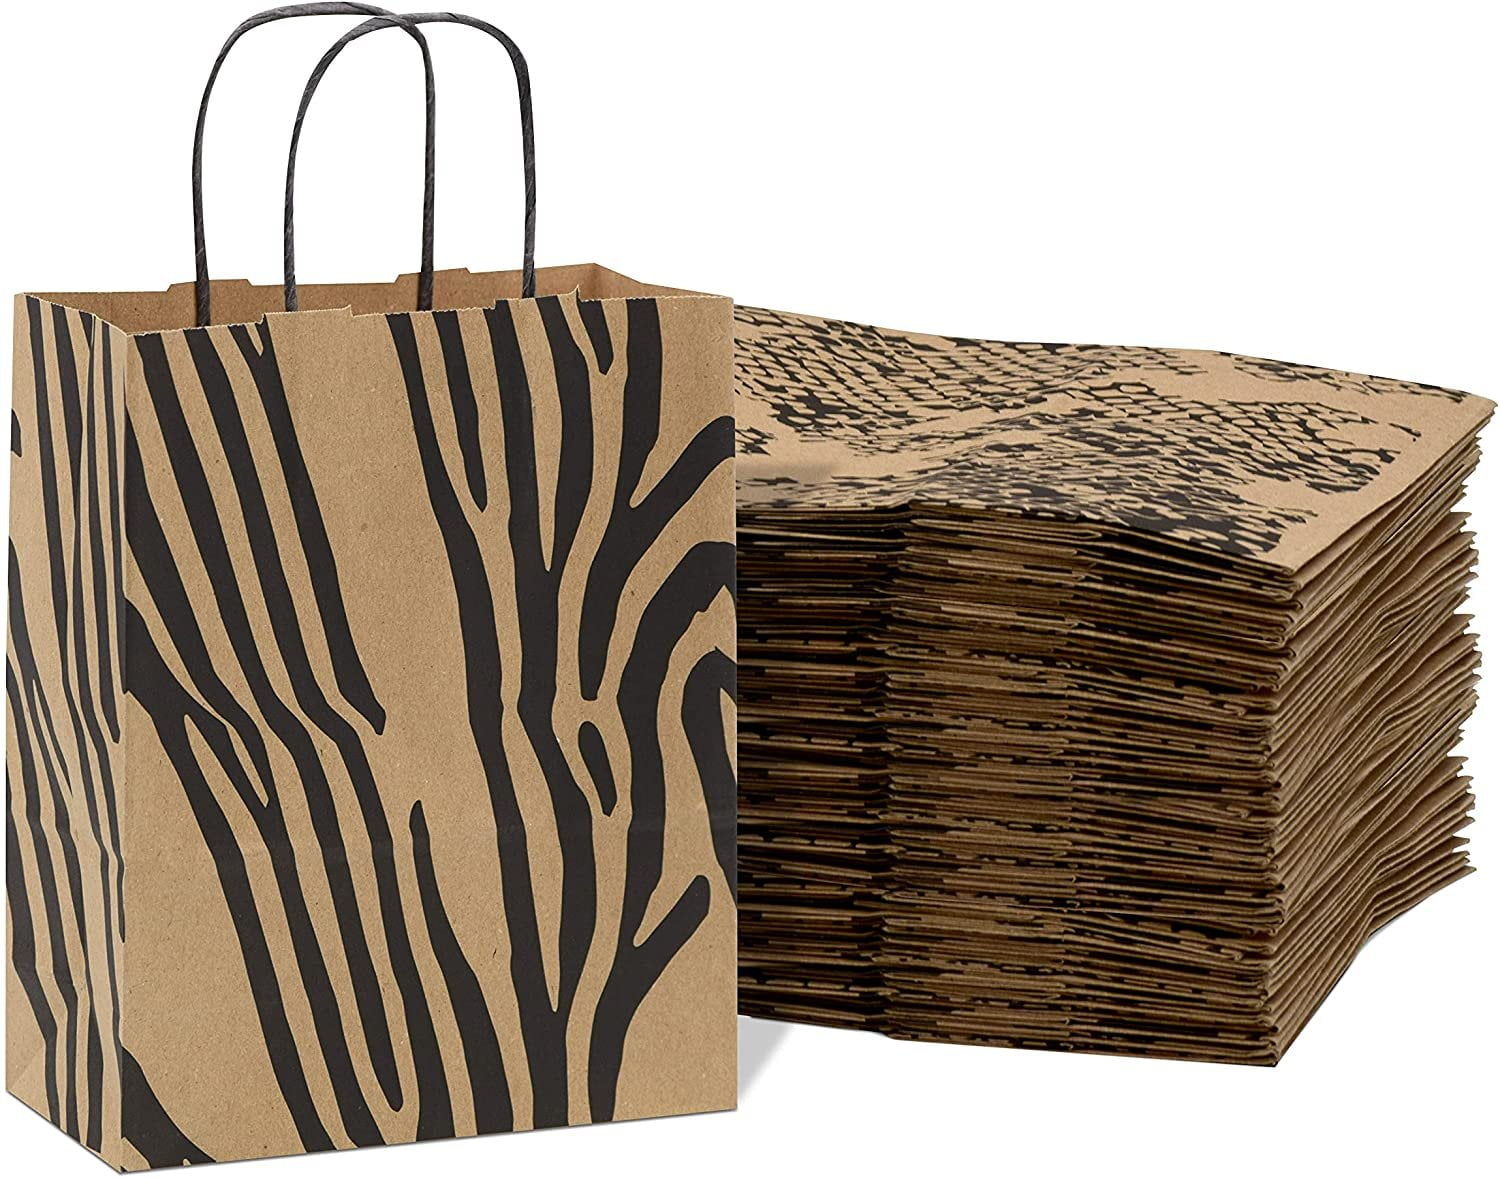 50pcs Medium Brown Kraft Paper Bags with Handles 10x5x13 inches 